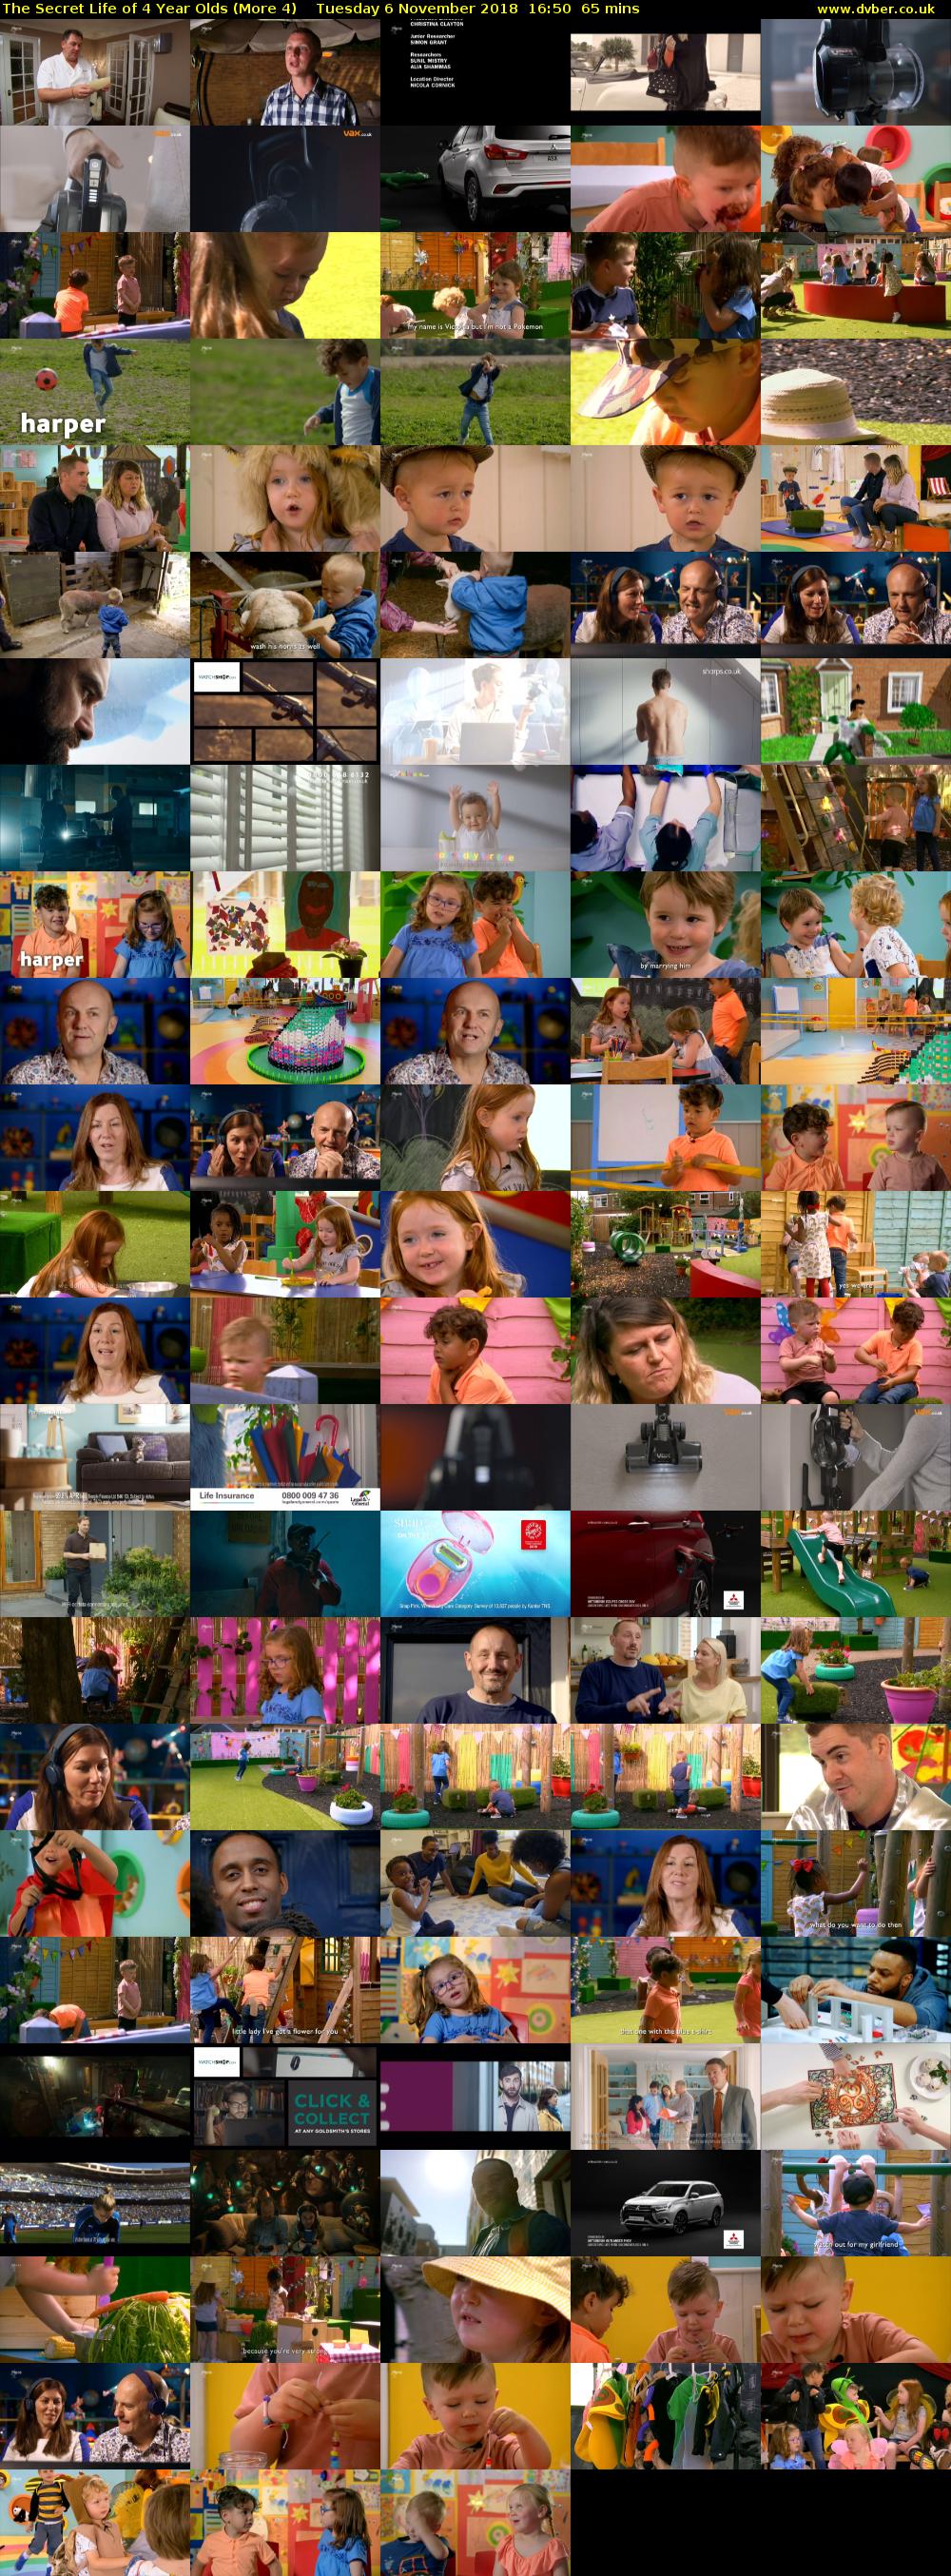 The Secret Life of 4 Year Olds (More 4) Tuesday 6 November 2018 16:50 - 17:55